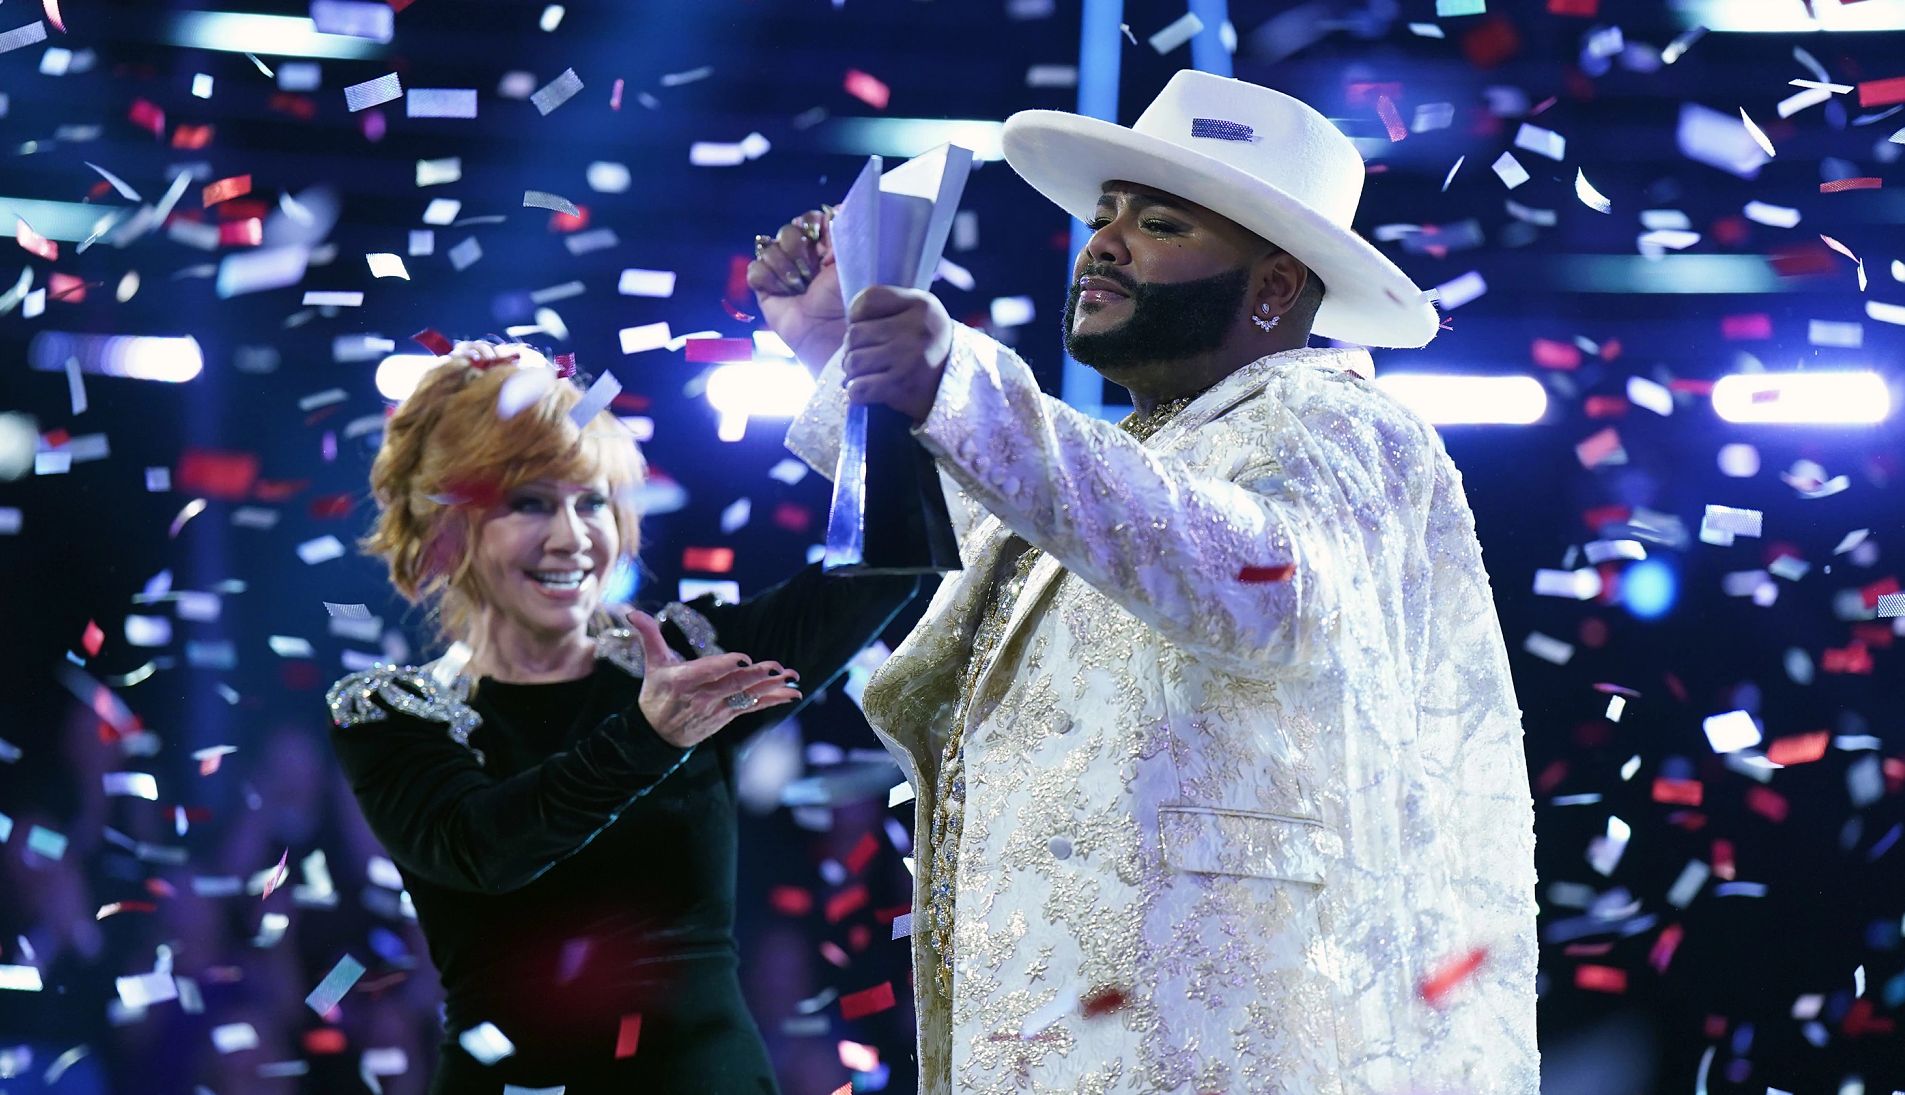 Asher HaVon holds up his trophy alongside Reba McEntire as confetti falls to the ground on the Season 25 finale of The Voice